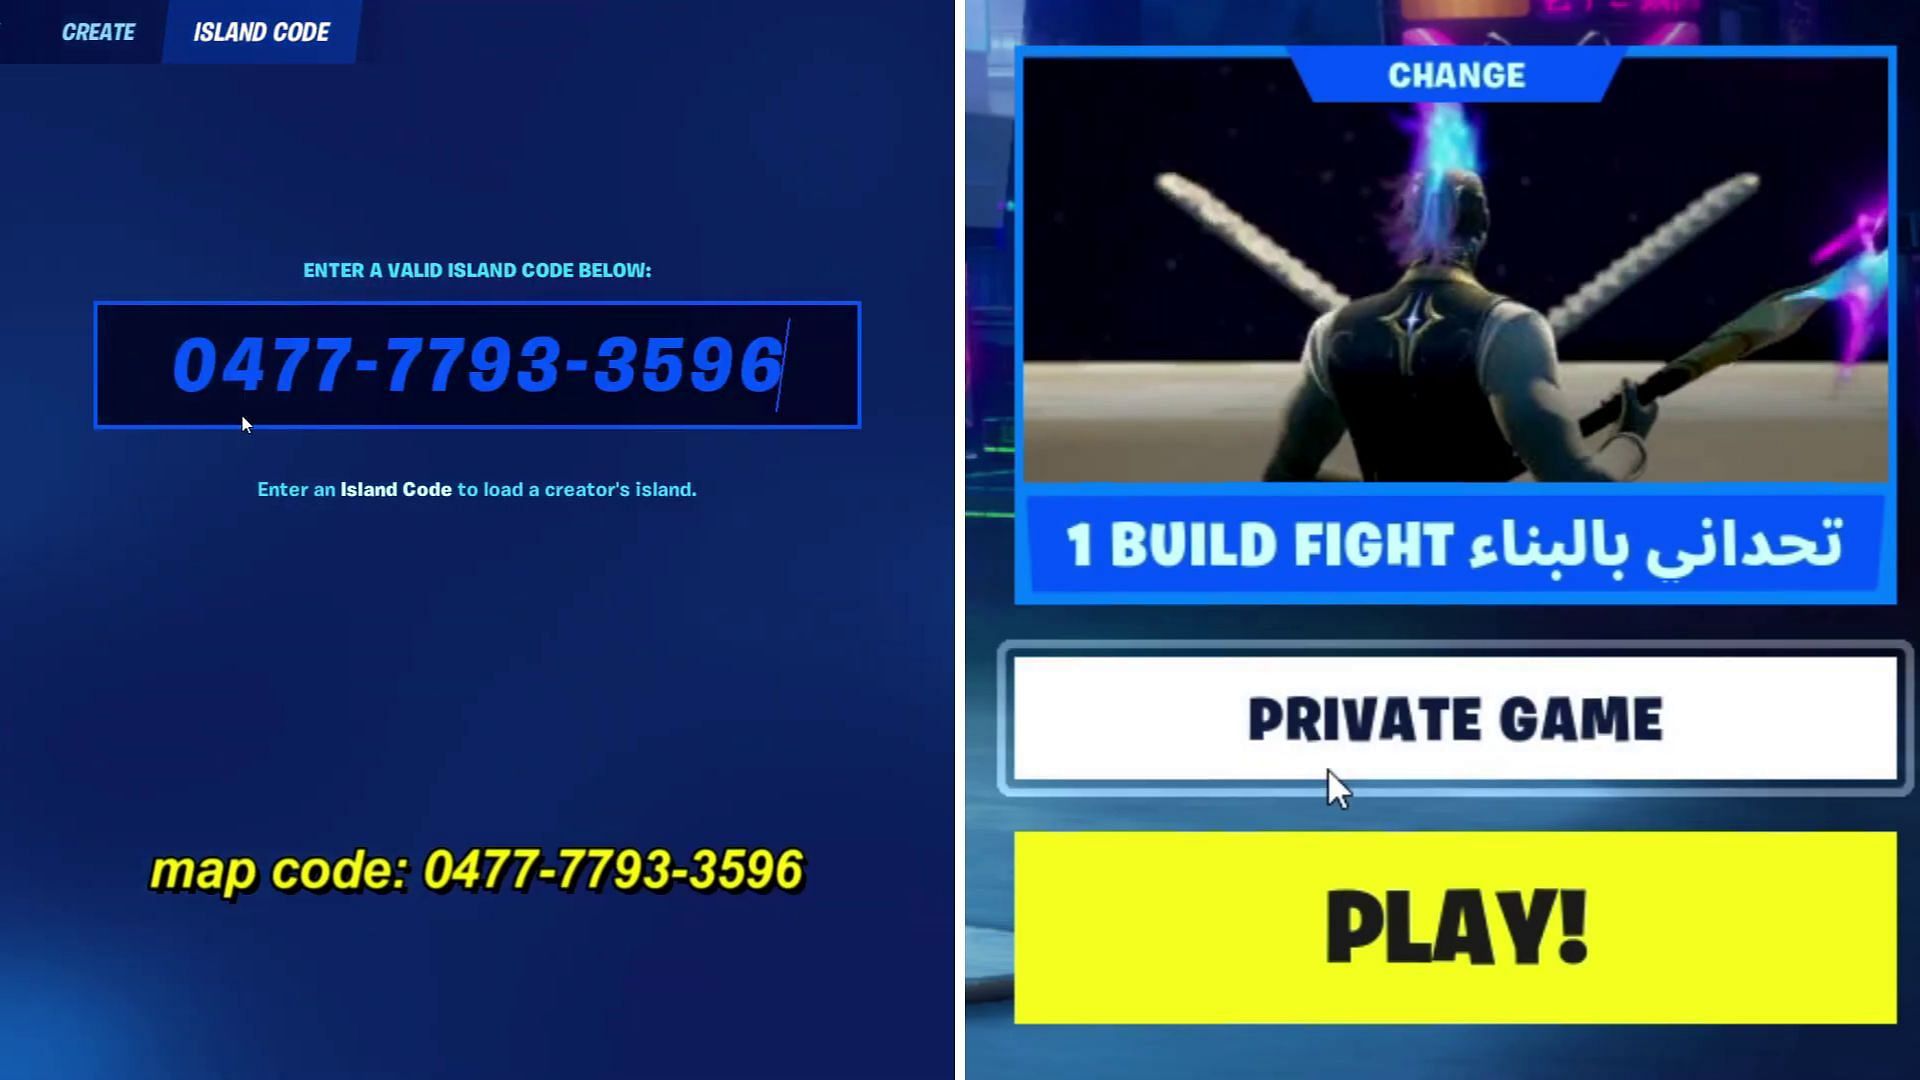 Enter the map code and choose private game (Image via YouTube/GKI)